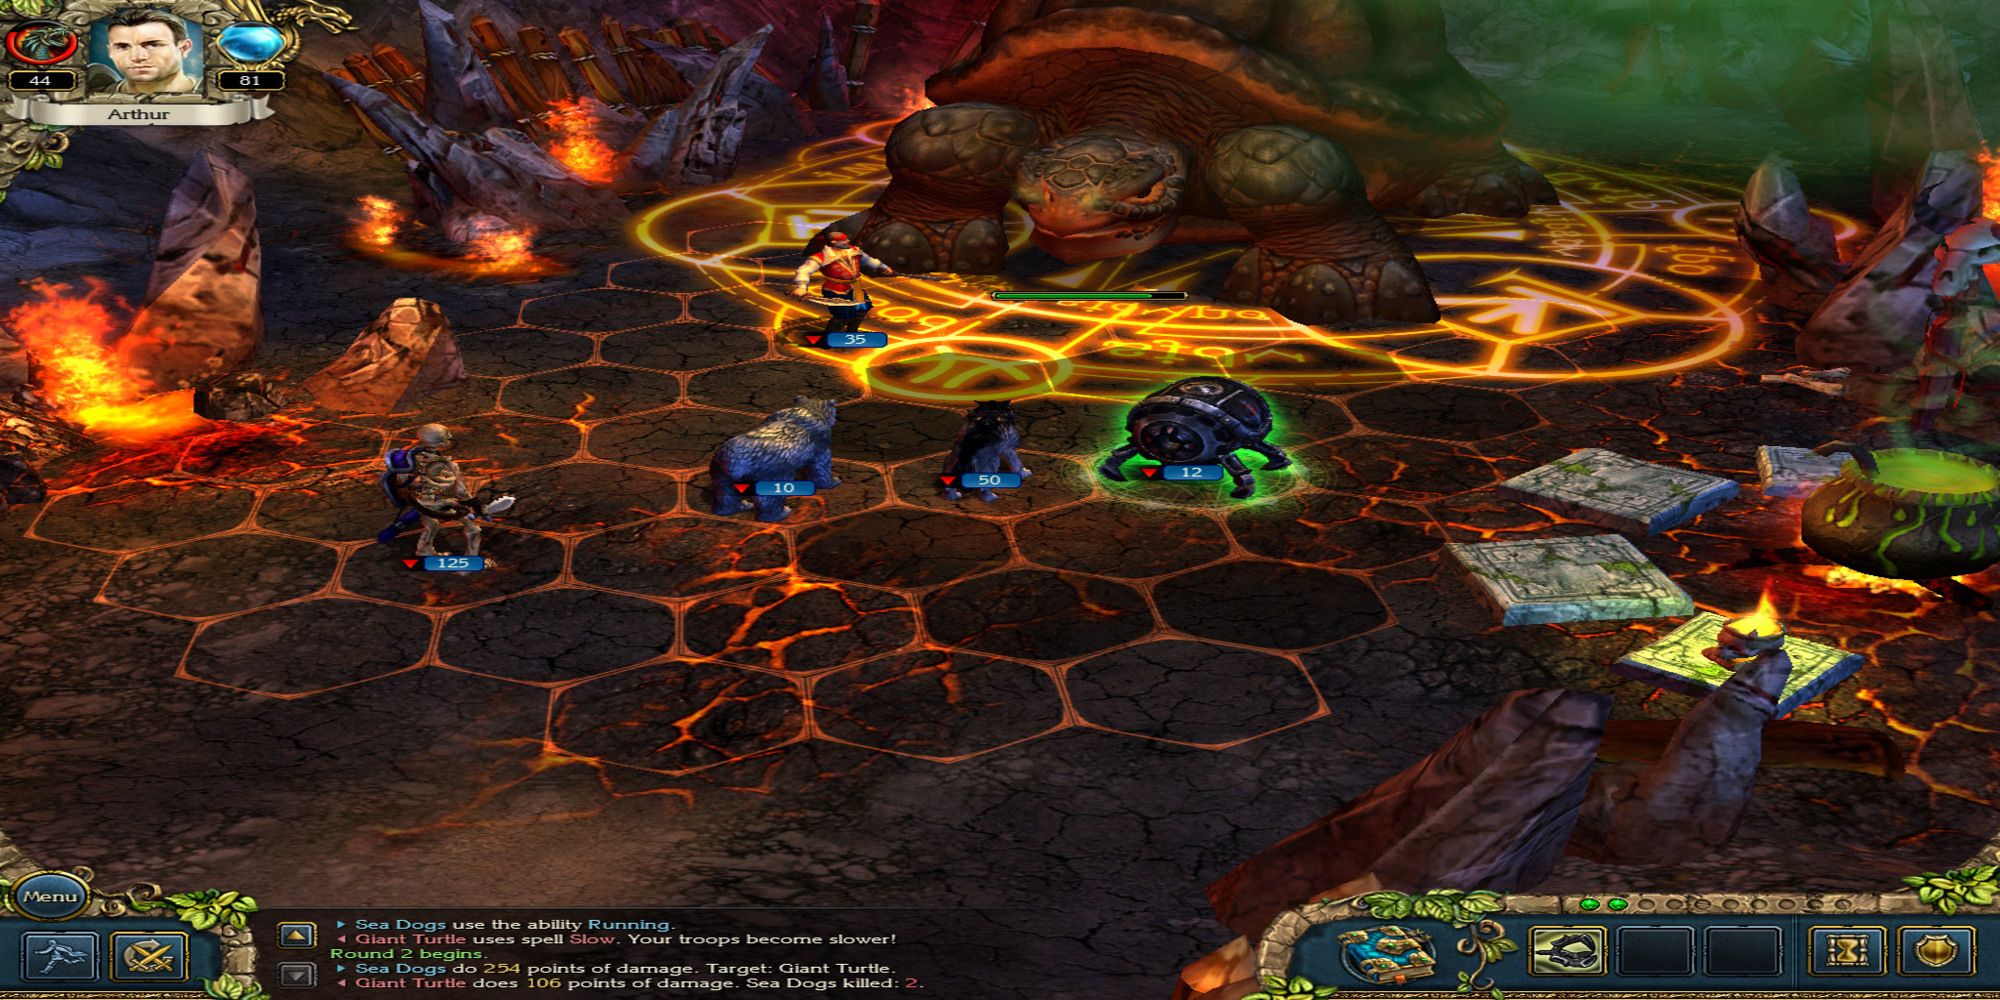 In-game Screenshot from King's Bounty Crossworlds showing enemies and tiles highlighted